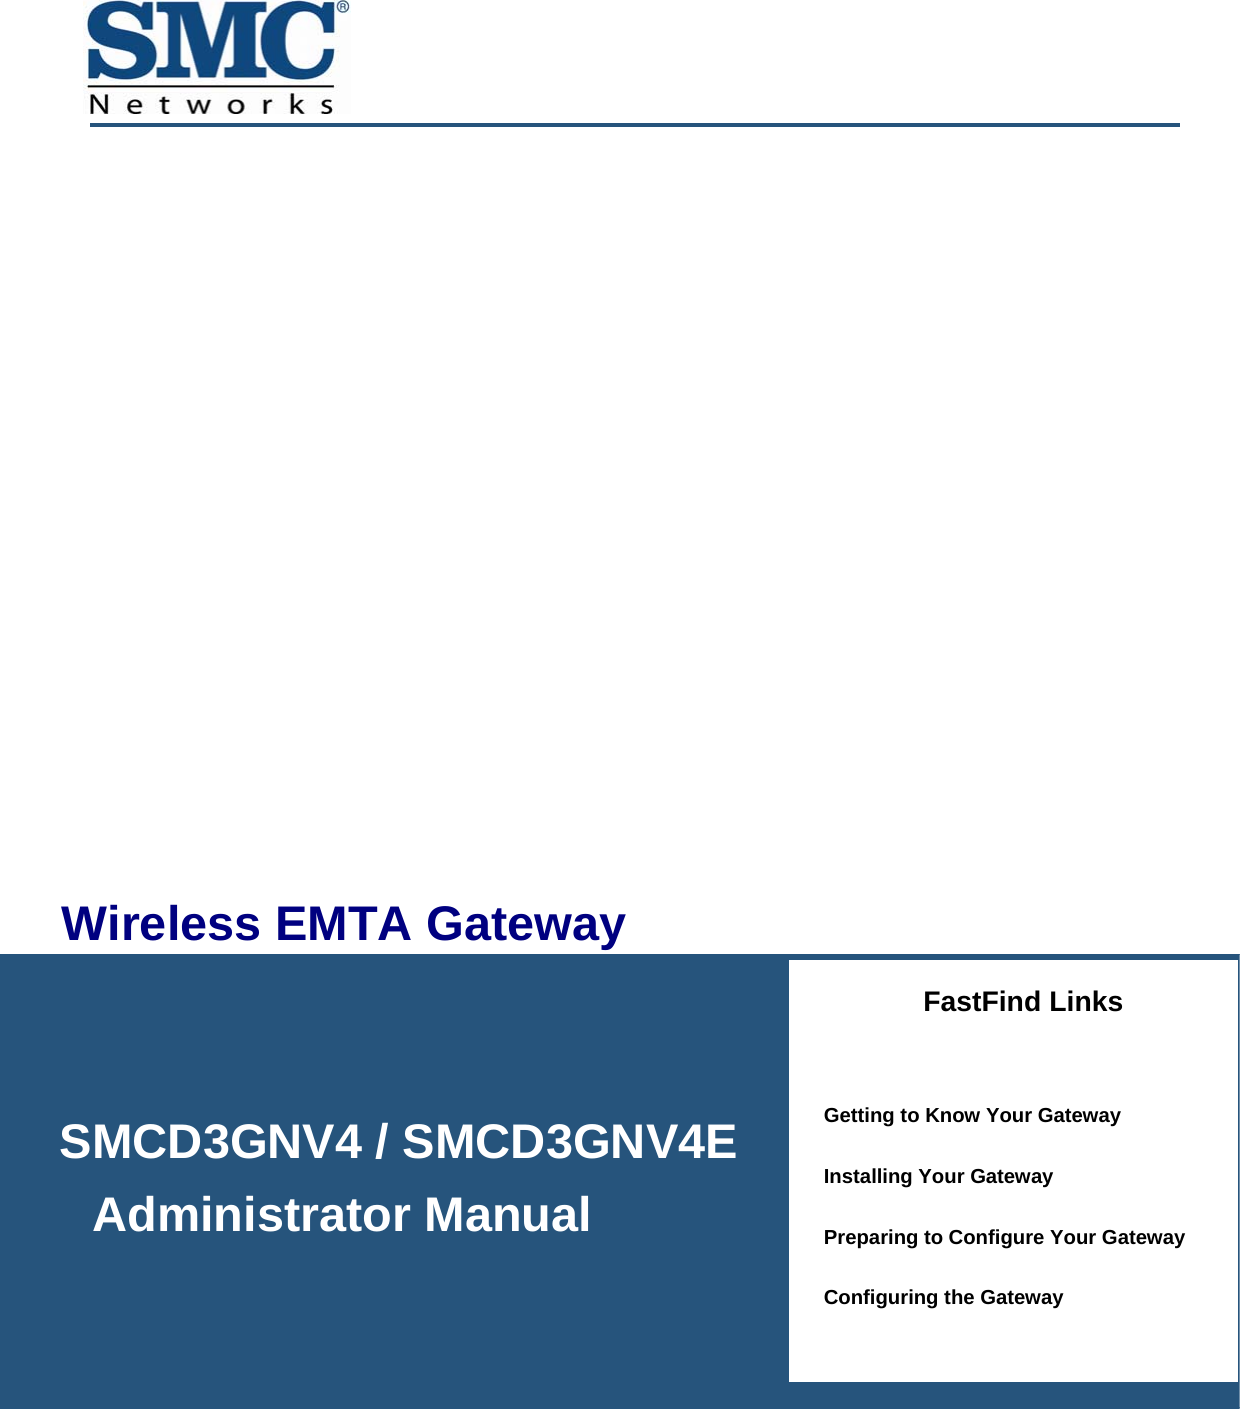   Administrator ManualSMCD3GNV4 / SMCD3GNV4E      Administrator Manual  Wireless EMTA Gateway FastFind Links  Getting to Know Your Gateway Installing Your Gateway Preparing to Configure Your Gateway Configuring the Gateway 